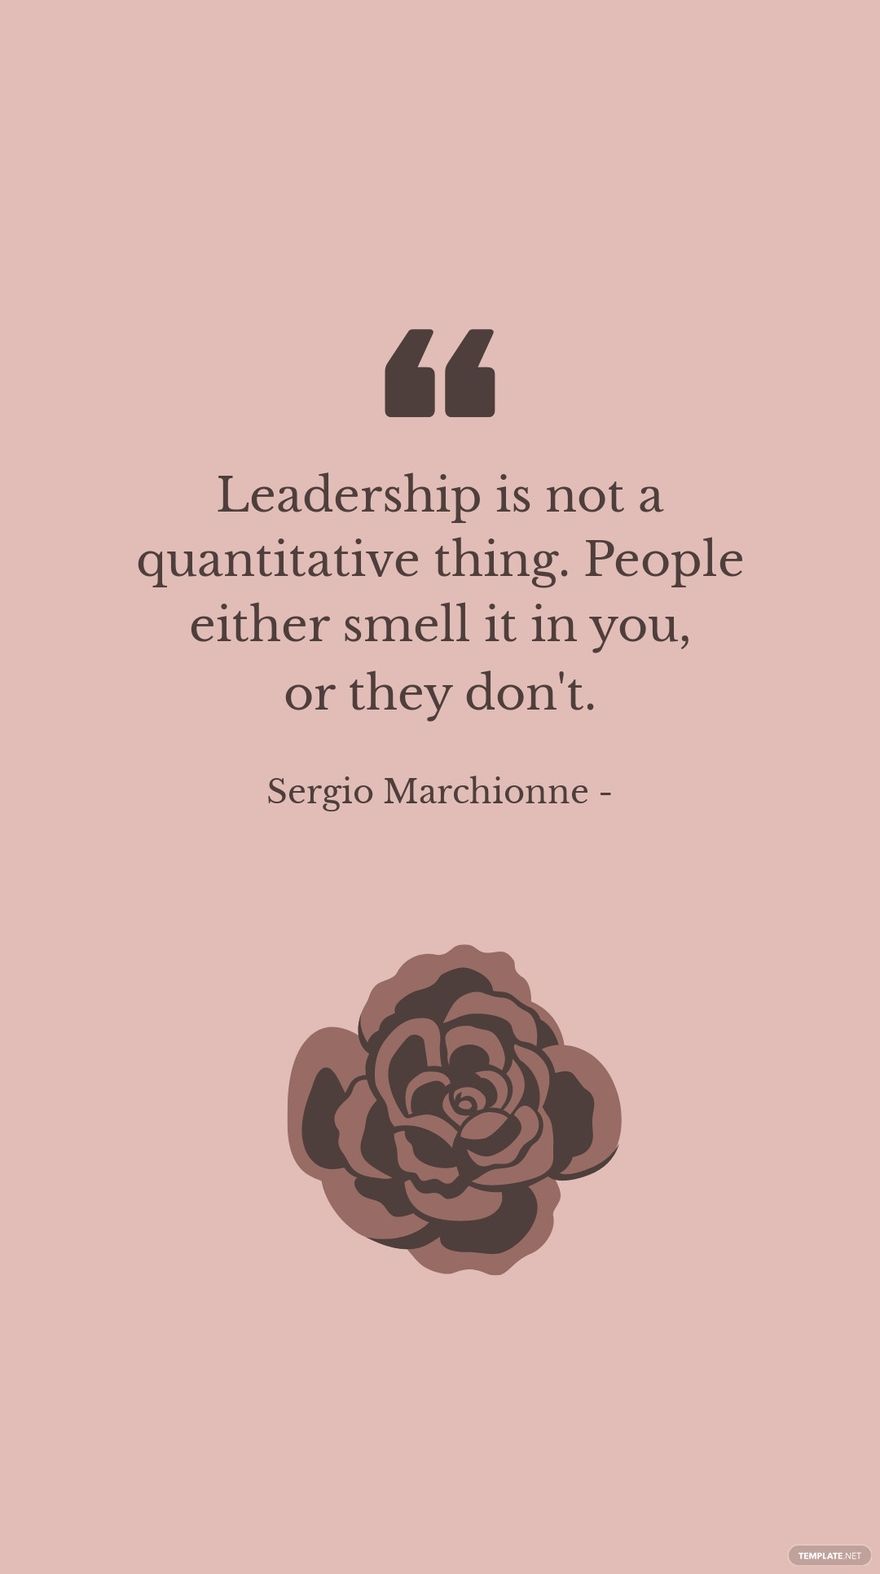 Free Sergio Marchionne - Leadership is not a quantitative thing. People either smell it in you, or they don't. in JPG